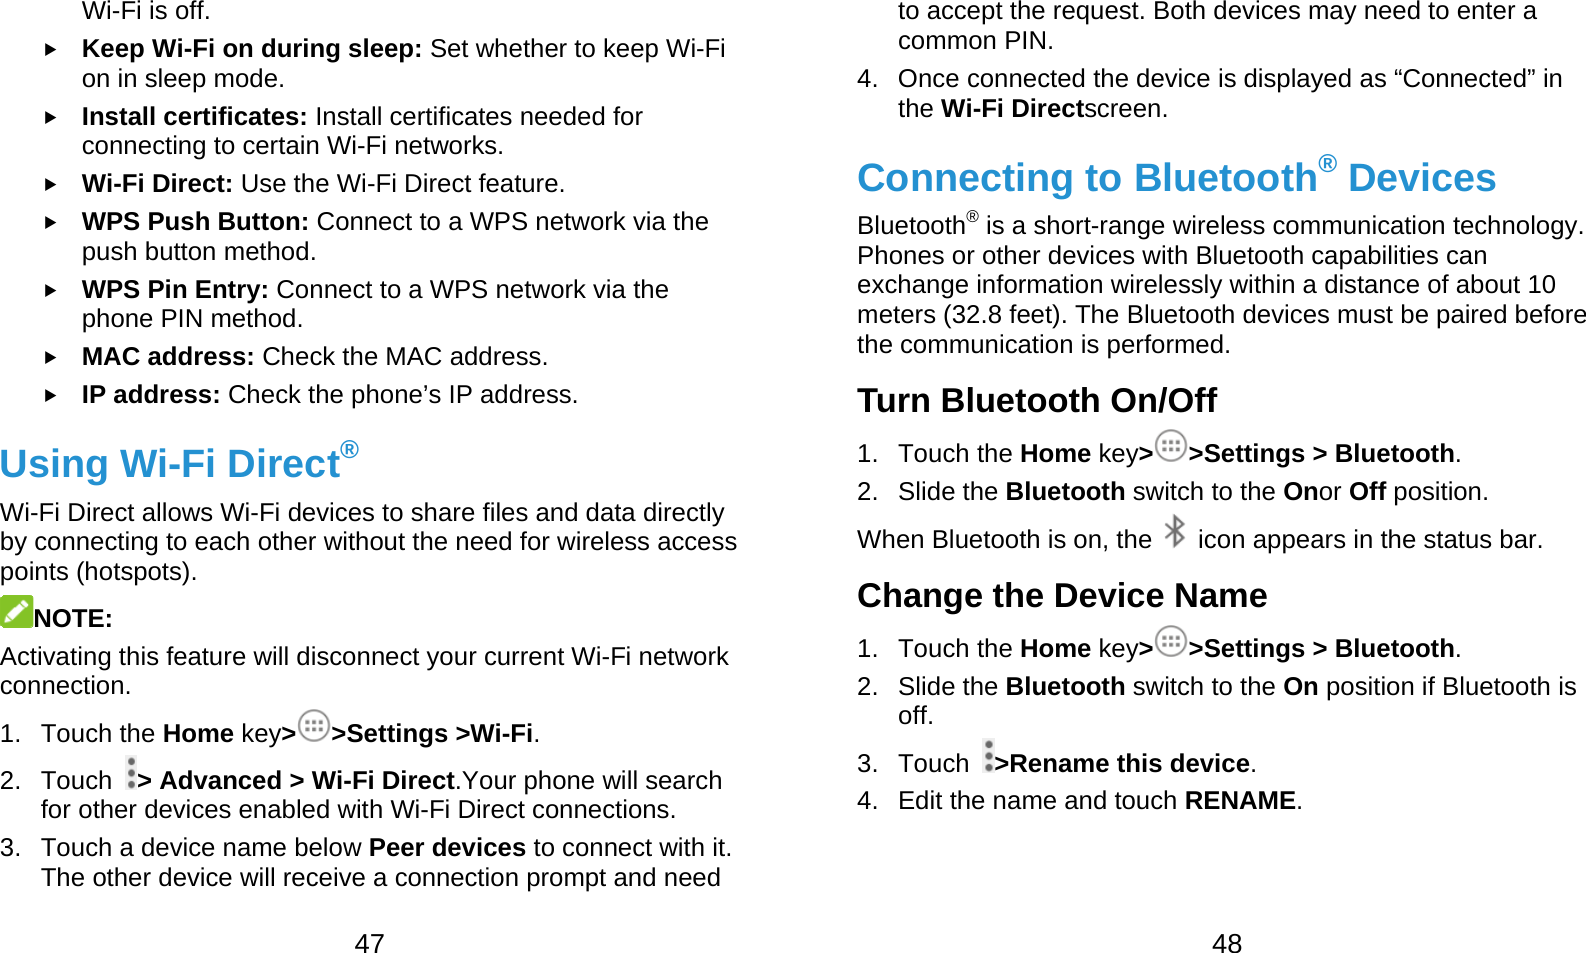  47 Wi-Fi is off.  Keep Wi-Fi on during sleep: Set whether to keep Wi-Fi on in sleep mode.  Install certificates: Install certificates needed for connecting to certain Wi-Fi networks.  Wi-Fi Direct: Use the Wi-Fi Direct feature.  WPS Push Button: Connect to a WPS network via the push button method.  WPS Pin Entry: Connect to a WPS network via the phone PIN method.  MAC address: Check the MAC address.  IP address: Check the phone’s IP address. Using Wi-Fi Direct® Wi-Fi Direct allows Wi-Fi devices to share files and data directly by connecting to each other without the need for wireless access points (hotspots). NOTE: Activating this feature will disconnect your current Wi-Fi network connection. 1. Touch the Home key&gt;&gt;Settings &gt;Wi-Fi. 2. Touch  &gt; Advanced &gt; Wi-Fi Direct.Your phone will search for other devices enabled with Wi-Fi Direct connections. 3. Touch a device name below Peer devices to connect with it. The other device will receive a connection prompt and need  48 to accept the request. Both devices may need to enter a common PIN. 4.  Once connected the device is displayed as “Connected” in the Wi-Fi Directscreen. Connecting to Bluetooth® Devices Bluetooth® is a short-range wireless communication technology. Phones or other devices with Bluetooth capabilities can exchange information wirelessly within a distance of about 10 meters (32.8 feet). The Bluetooth devices must be paired before the communication is performed. Turn Bluetooth On/Off 1. Touch the Home key&gt;&gt;Settings &gt; Bluetooth. 2. Slide the Bluetooth switch to the Onor Off position. When Bluetooth is on, the    icon appears in the status bar.   Change the Device Name 1. Touch the Home key&gt;&gt;Settings &gt; Bluetooth. 2. Slide the Bluetooth switch to the On position if Bluetooth is off. 3. Touch  &gt;Rename this device. 4.  Edit the name and touch RENAME. 